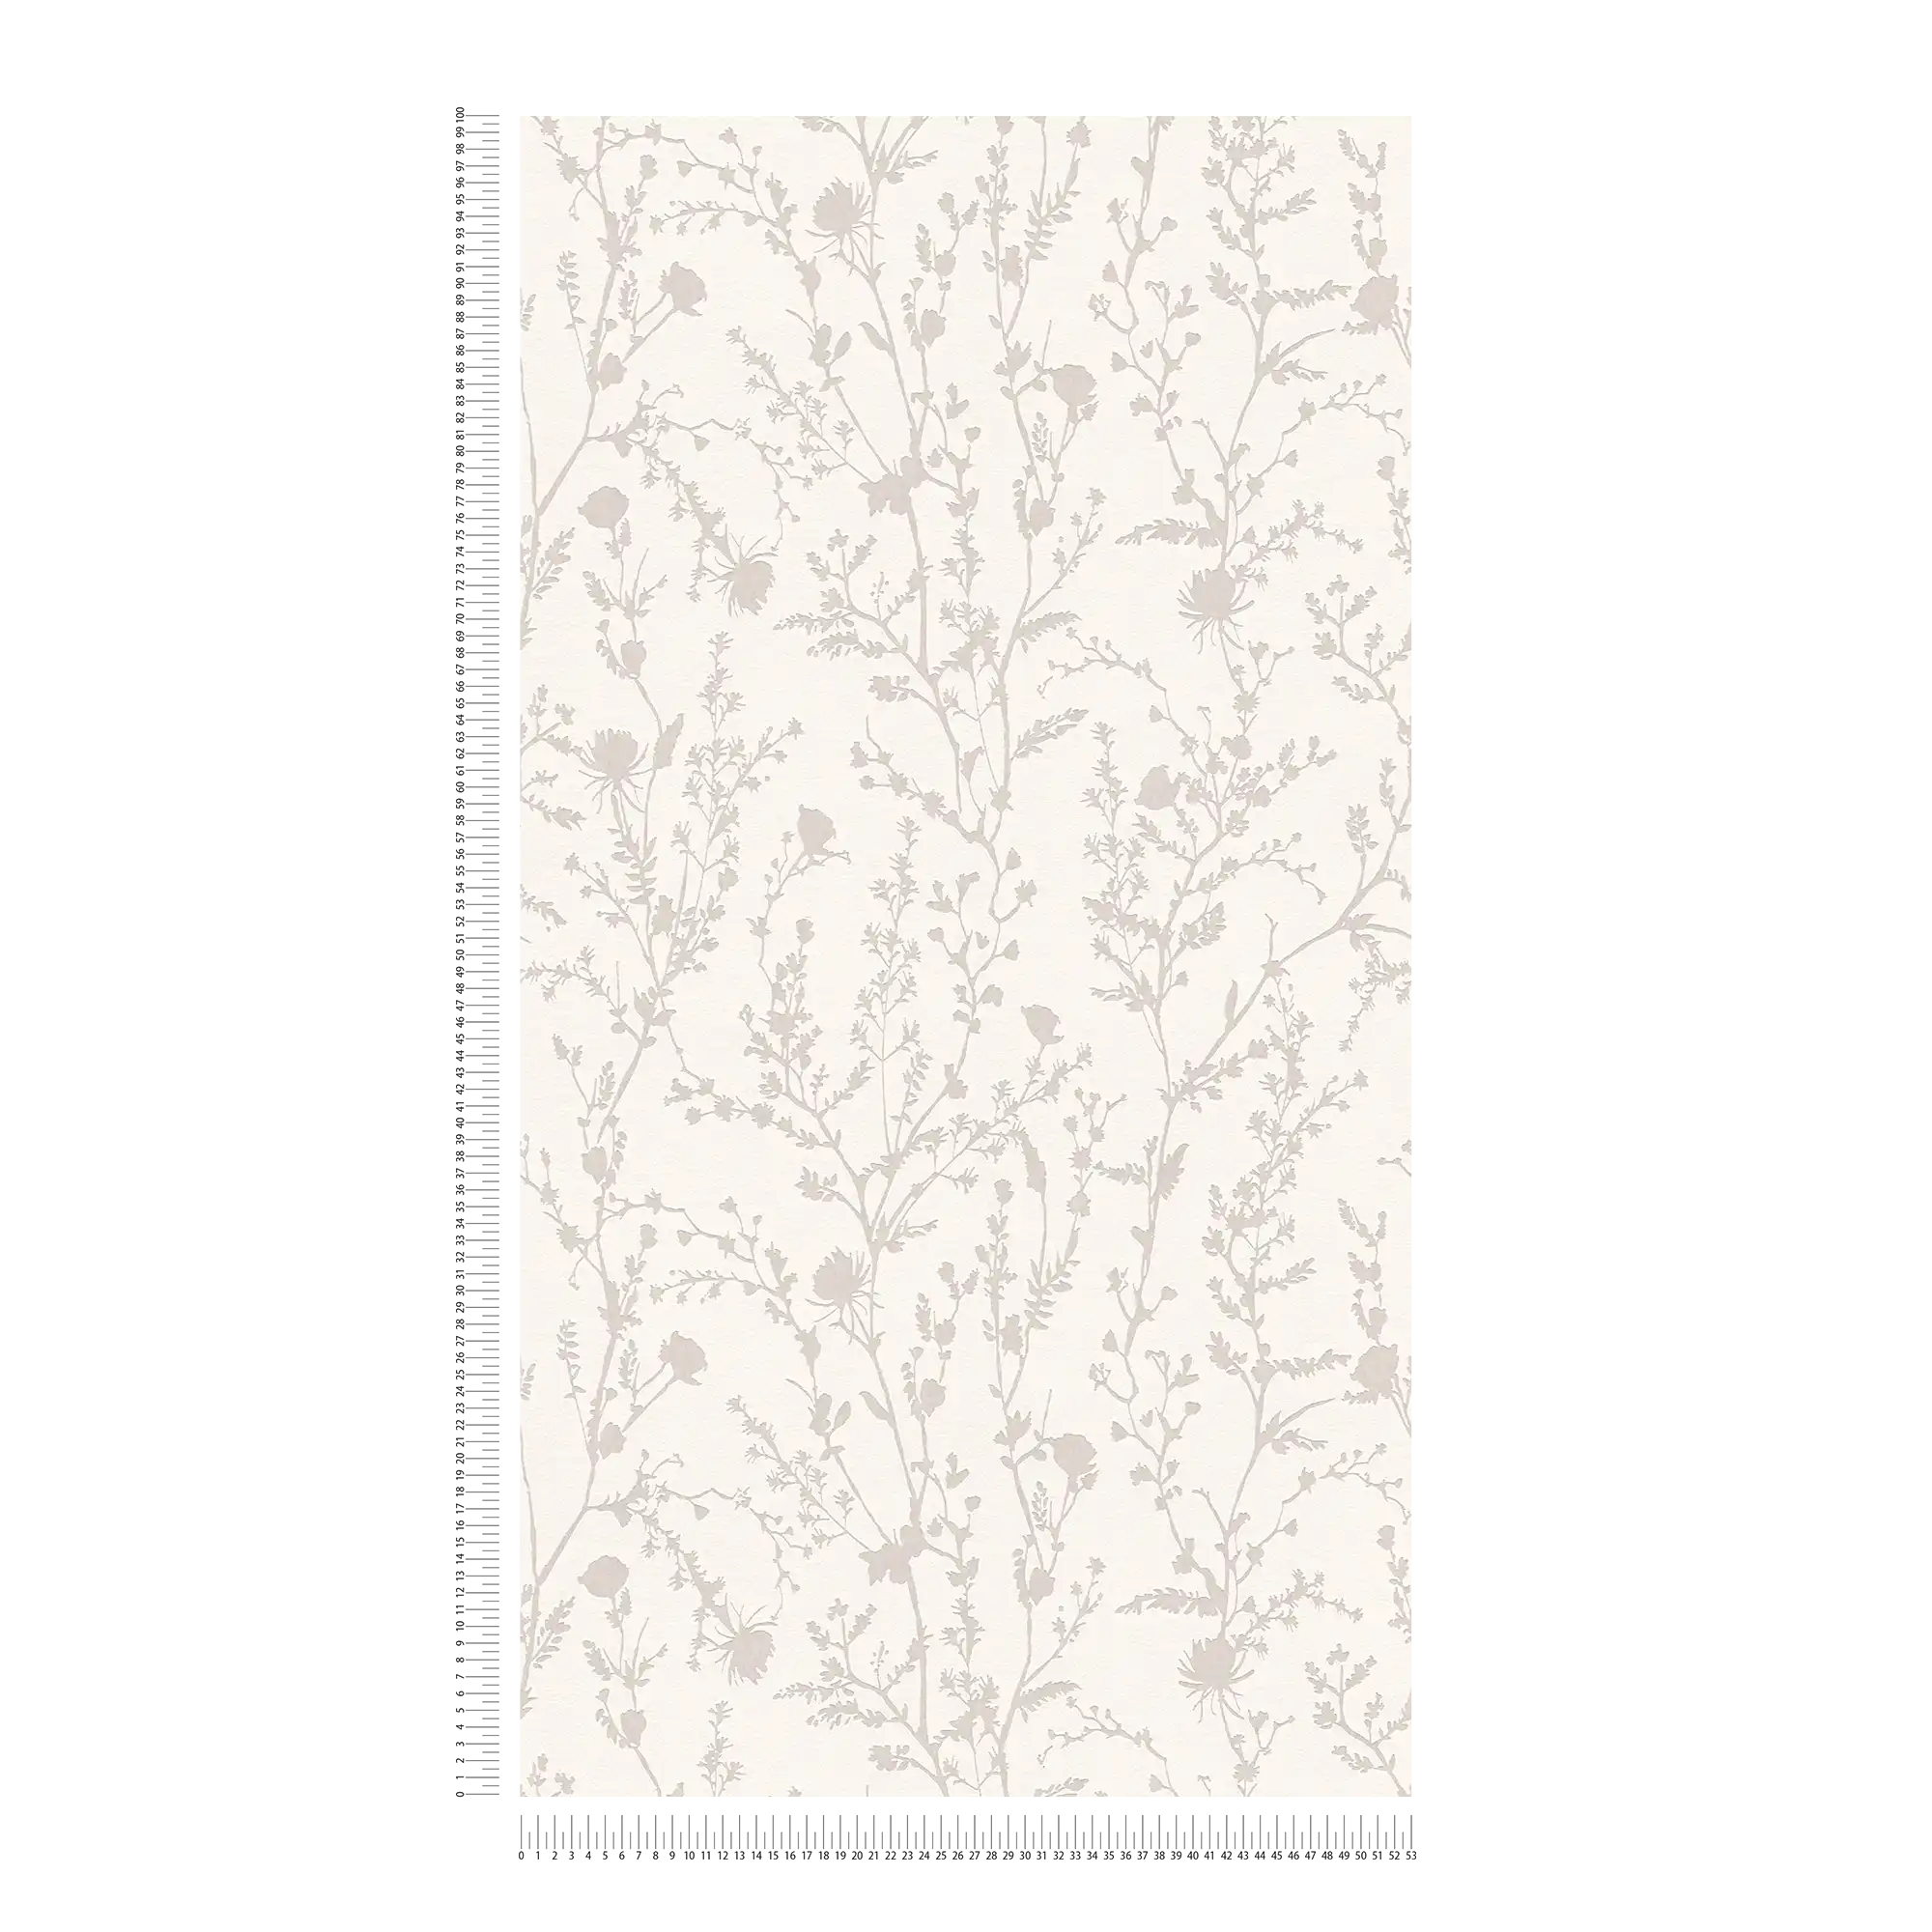             Non-woven wallpaper soft grasses and floral pattern - white, grey
        